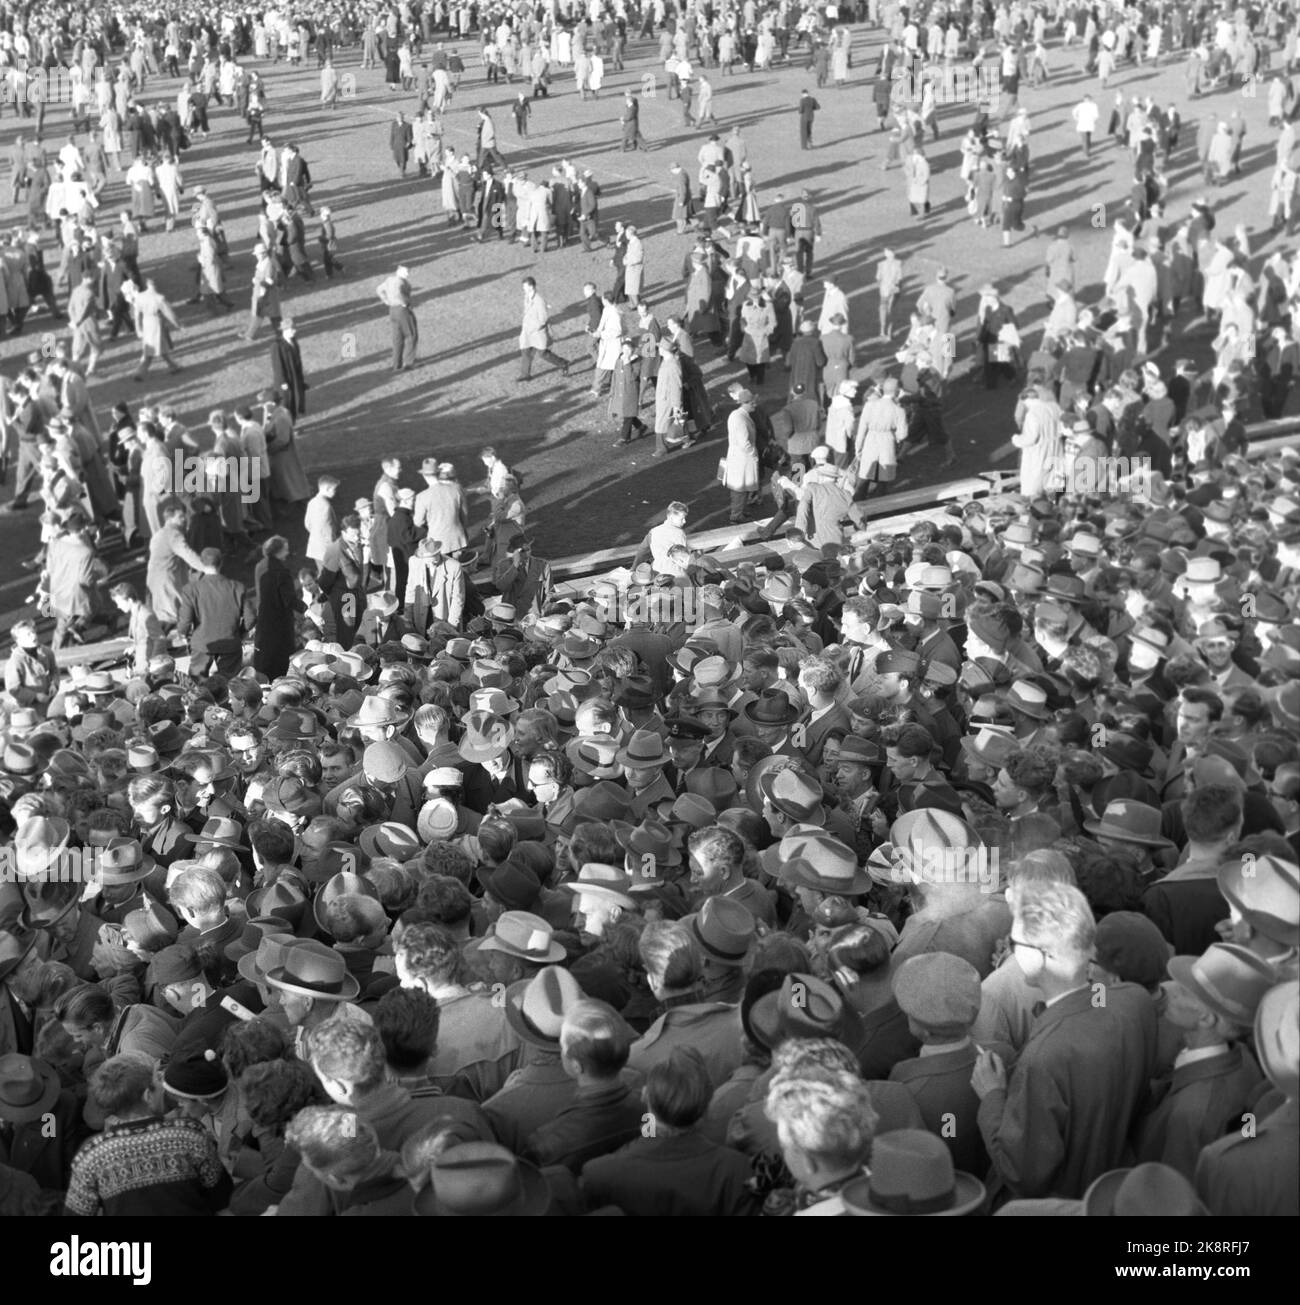 Oslo, 19561021. The cup final at Ullevaal Stadium. Larvik Turn - Skeid 1-2. Spectators in the stands and on the field after the match. Photo: Current / NTB Stock Photo